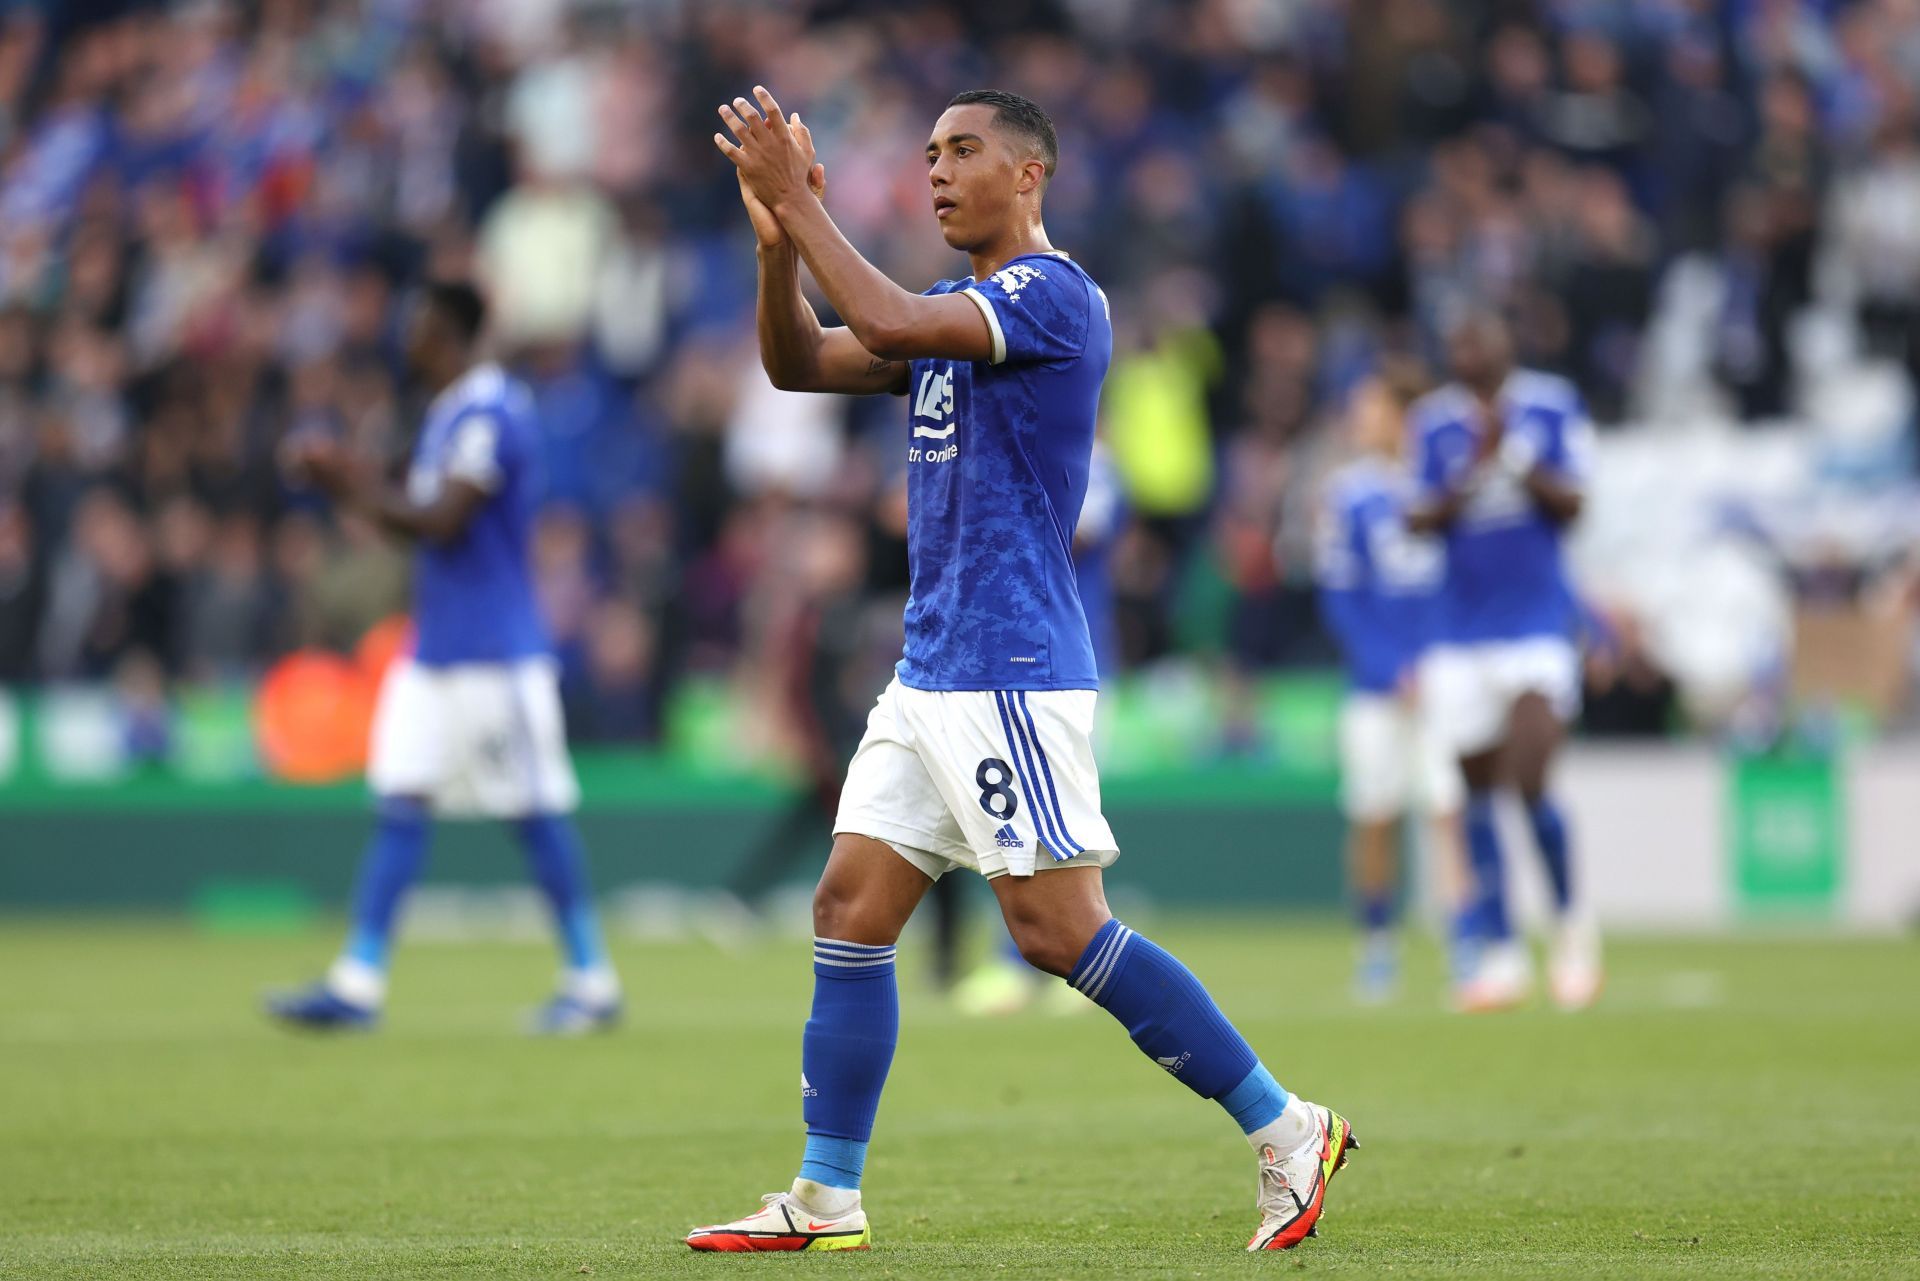 Youri Tielemans has been a decent performer in the Premier League.